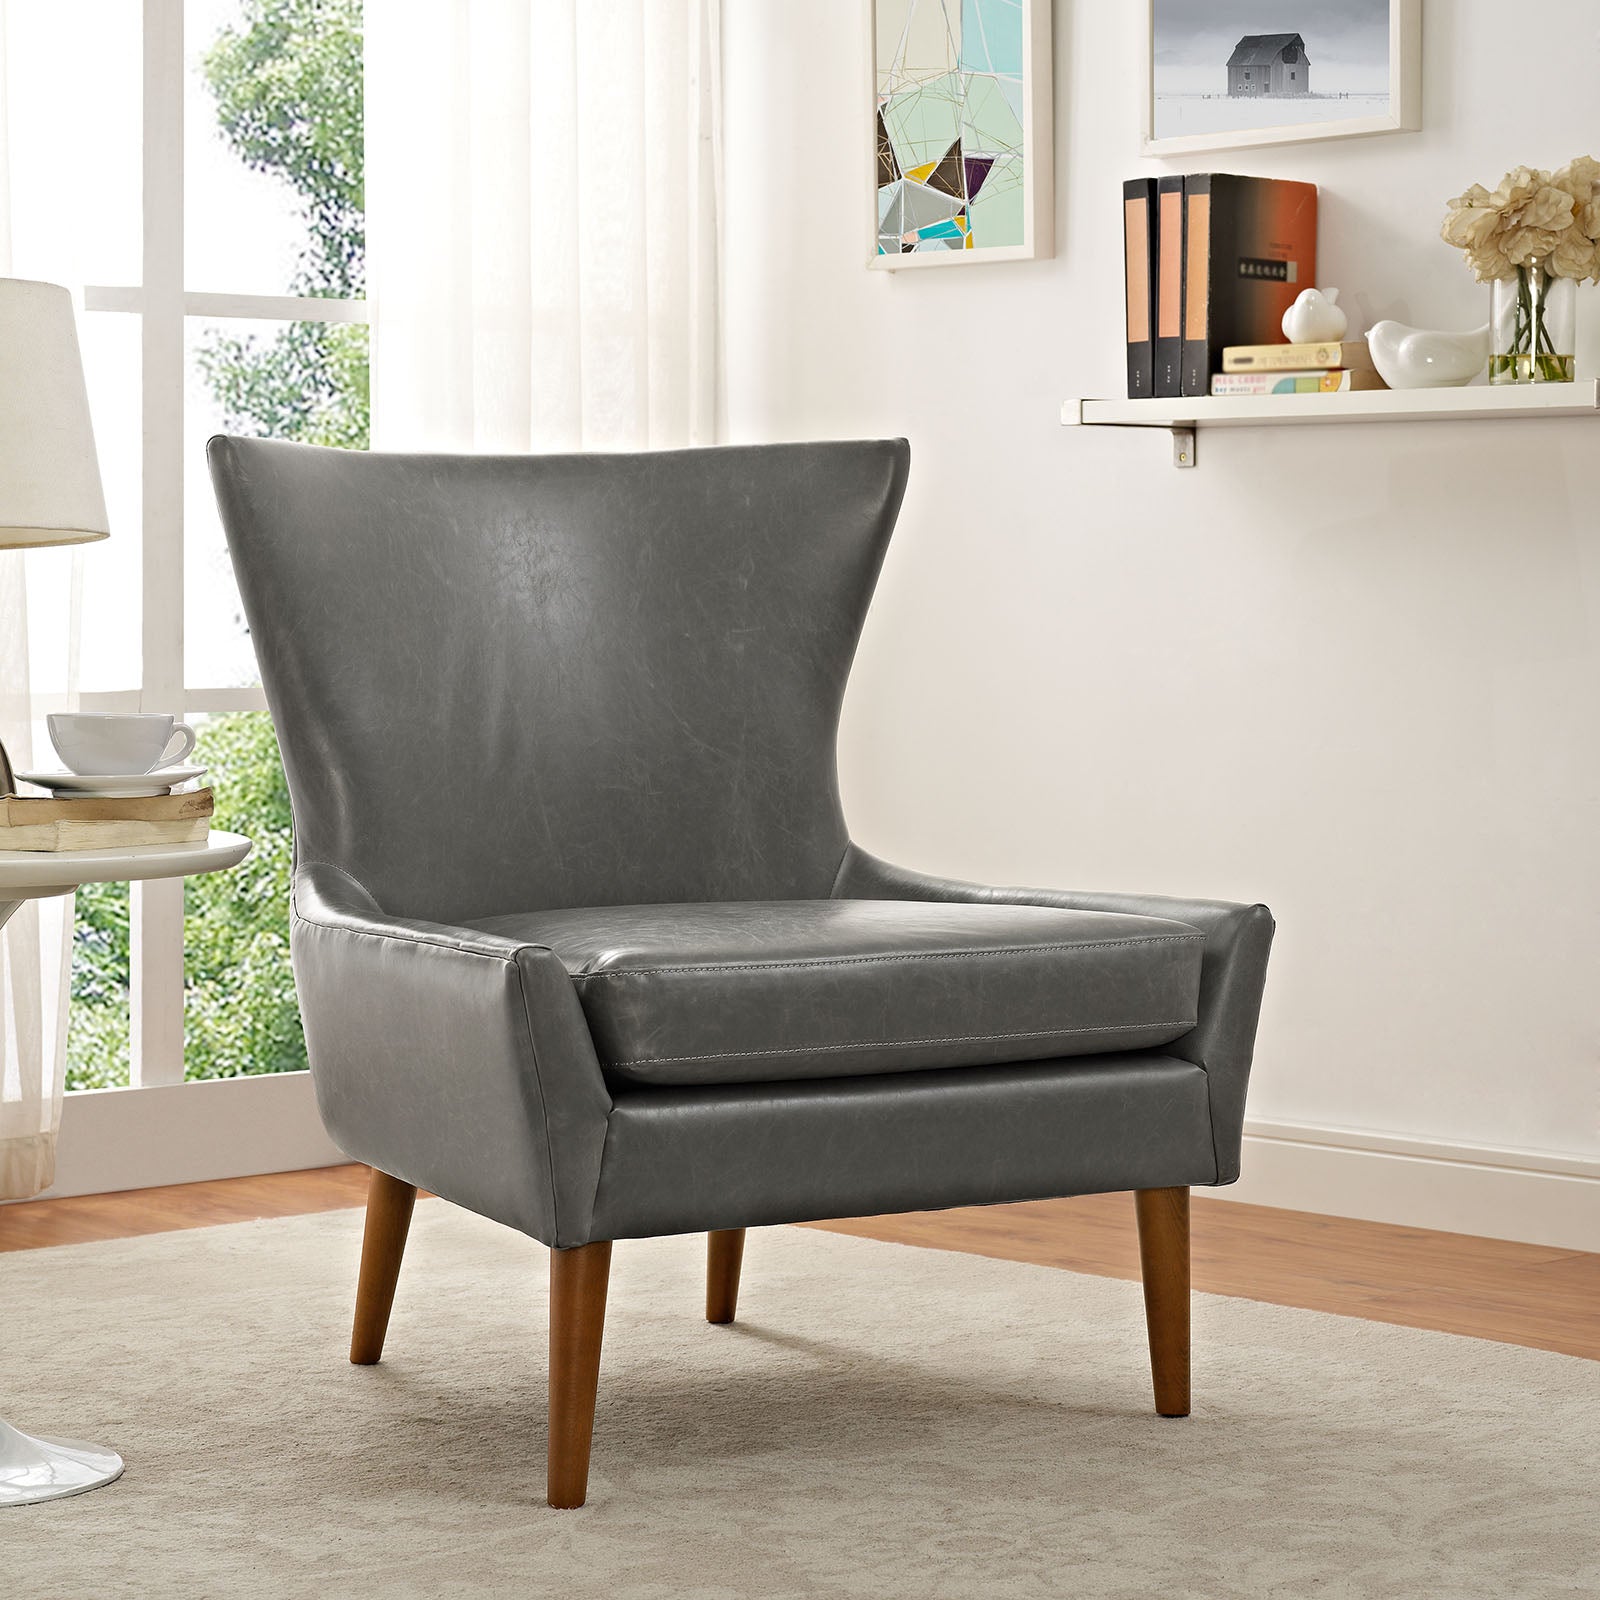 Modway Chairs - Keen Upholstered Vinyl Armchair Gray